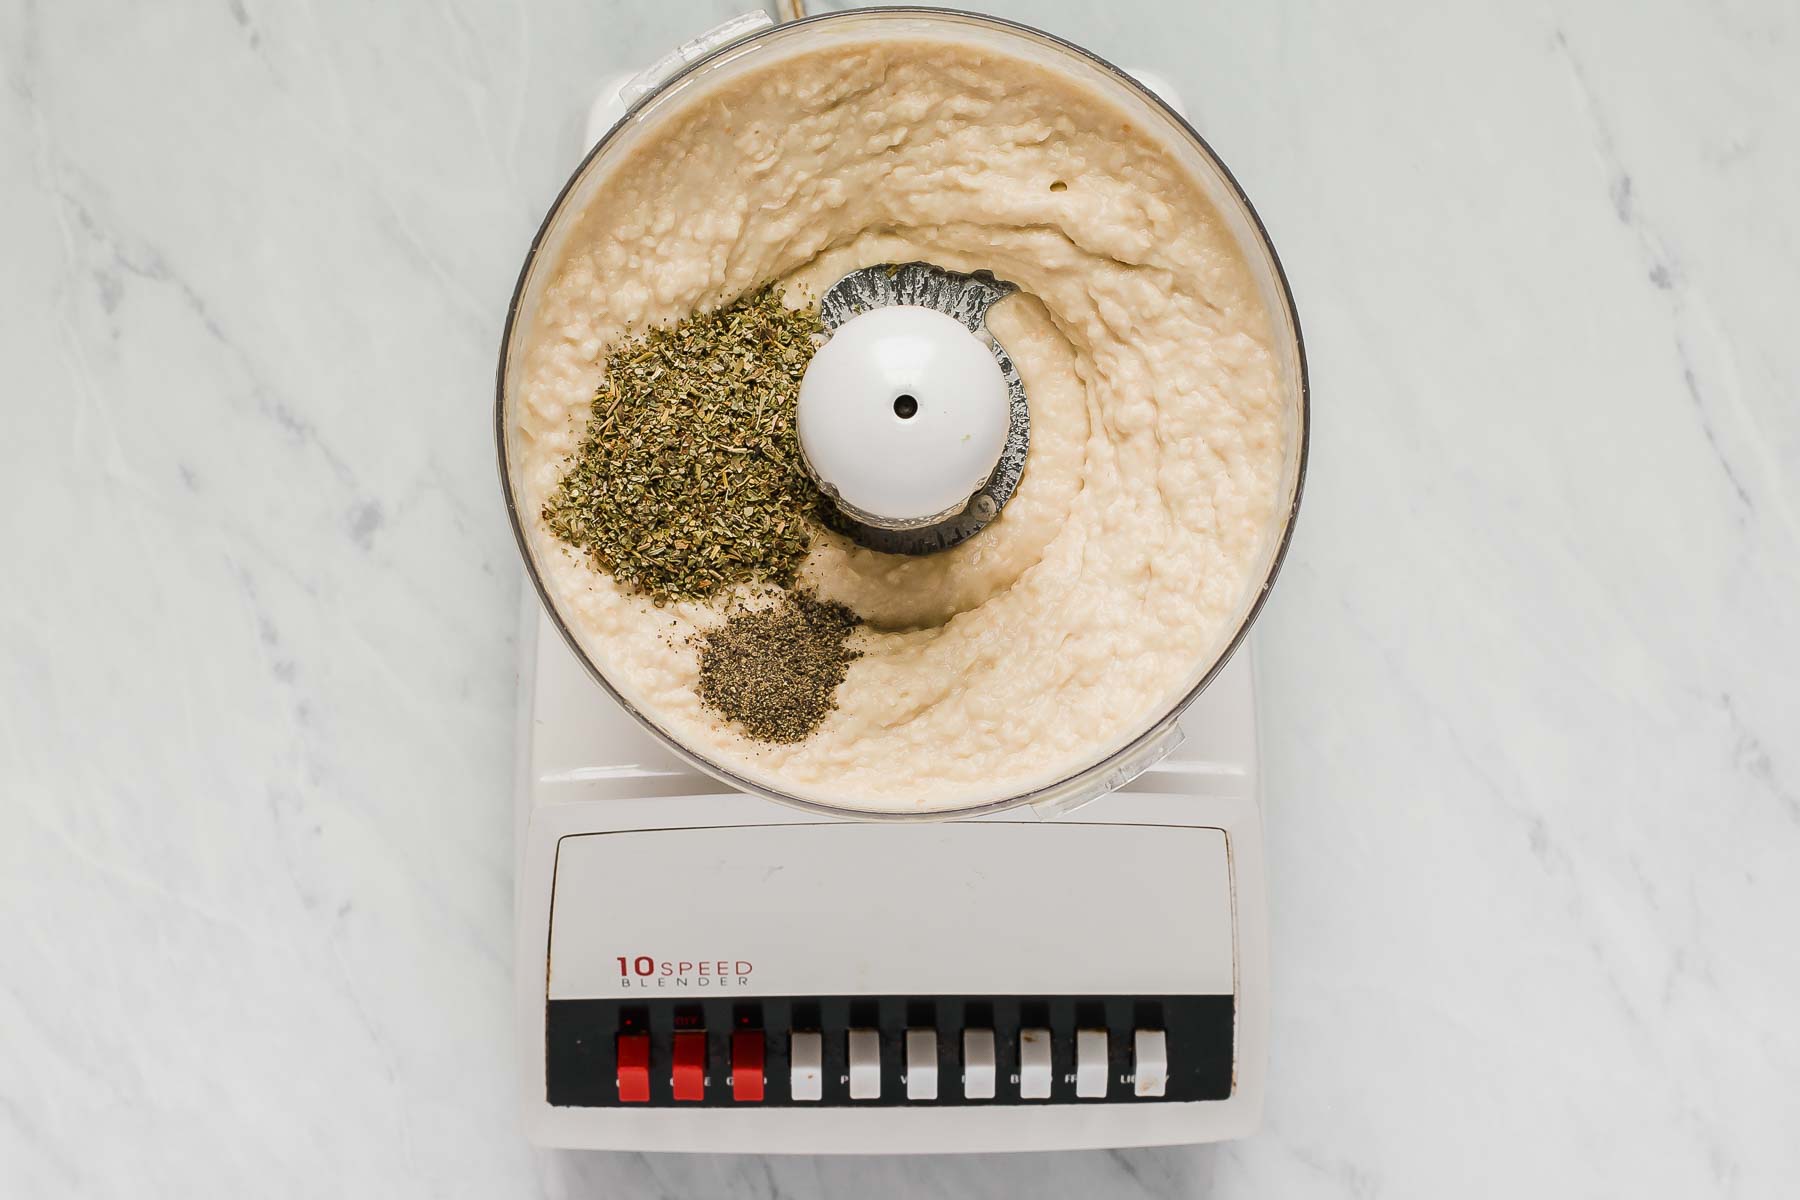 White bean dip in food processor with herbs on top.